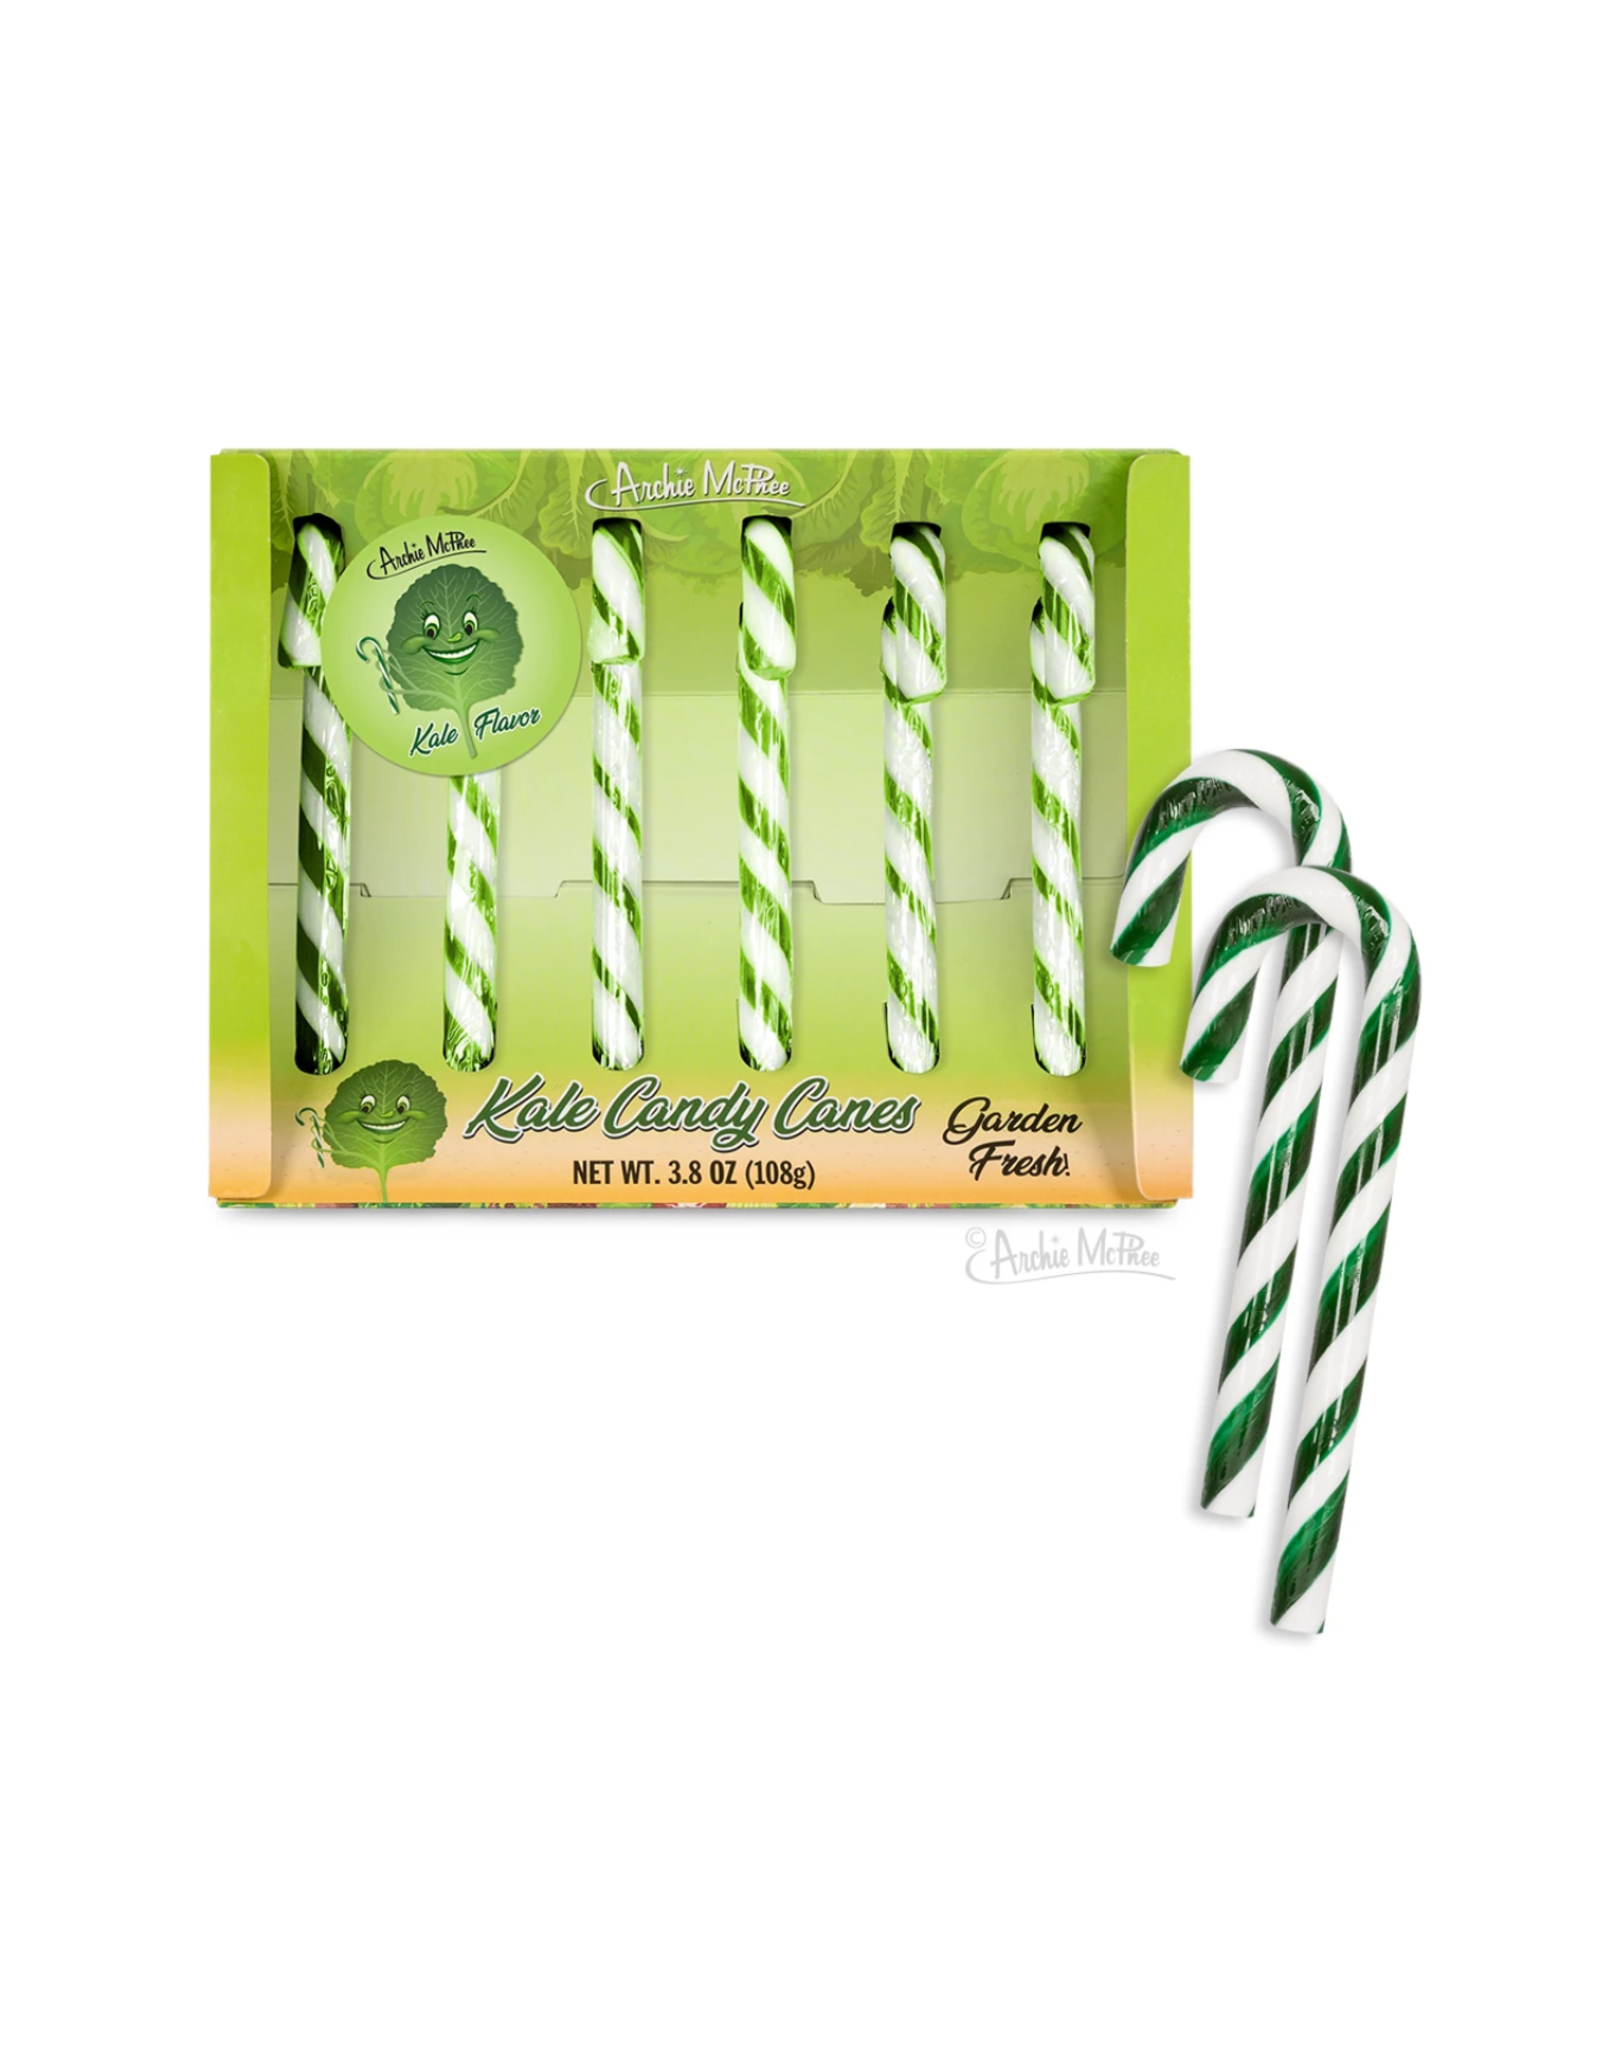 Candy Canes Set of 6 - Kale